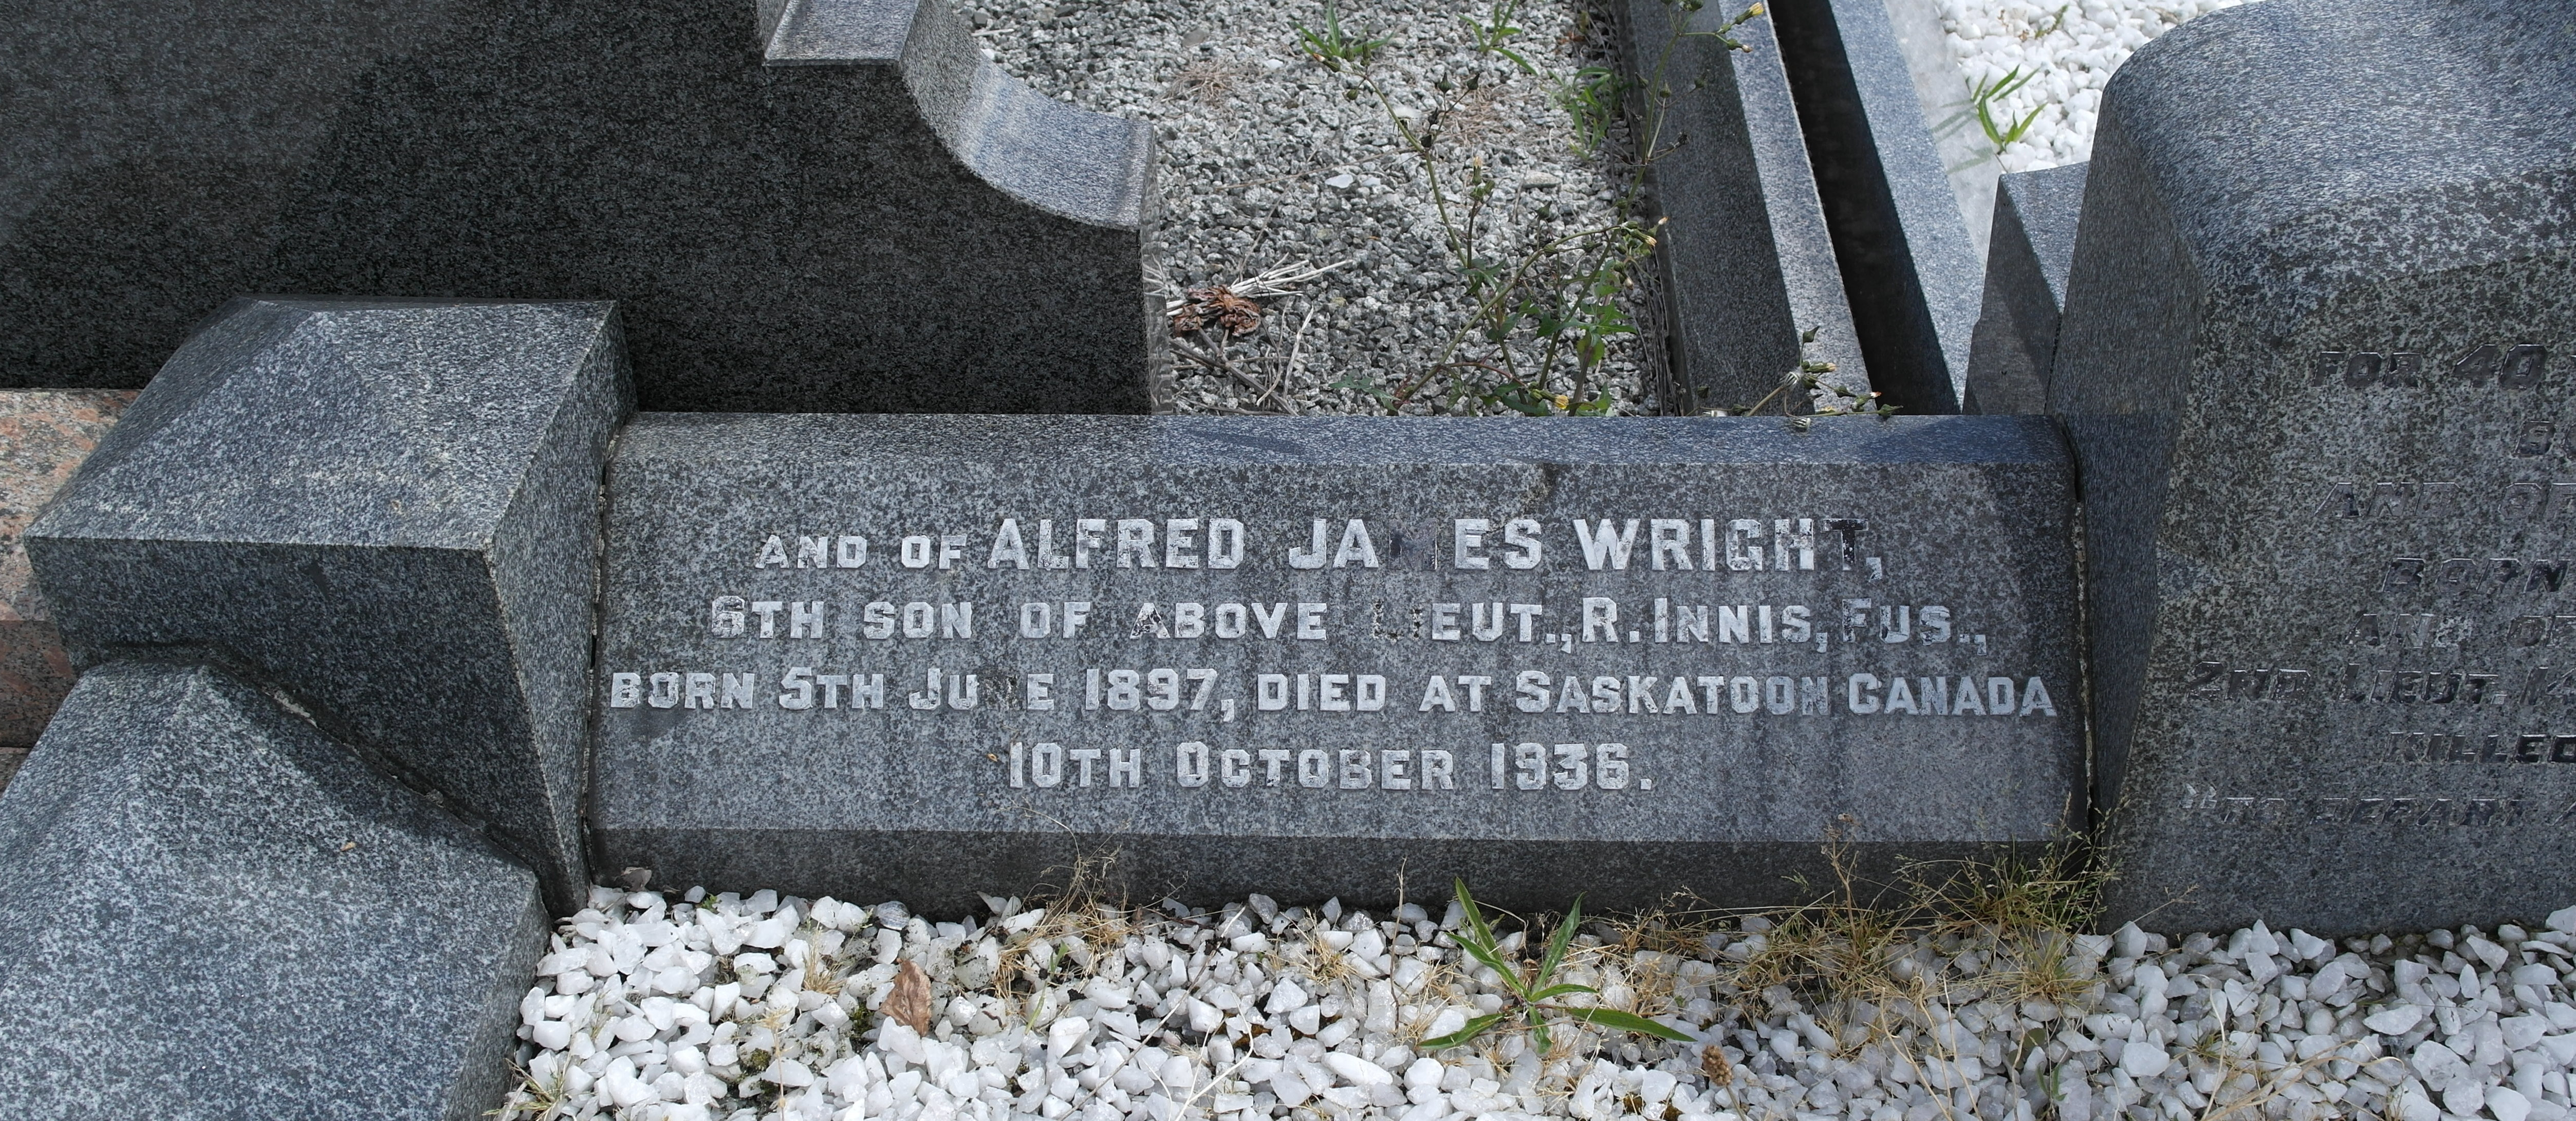 Alfred James WRIGHT